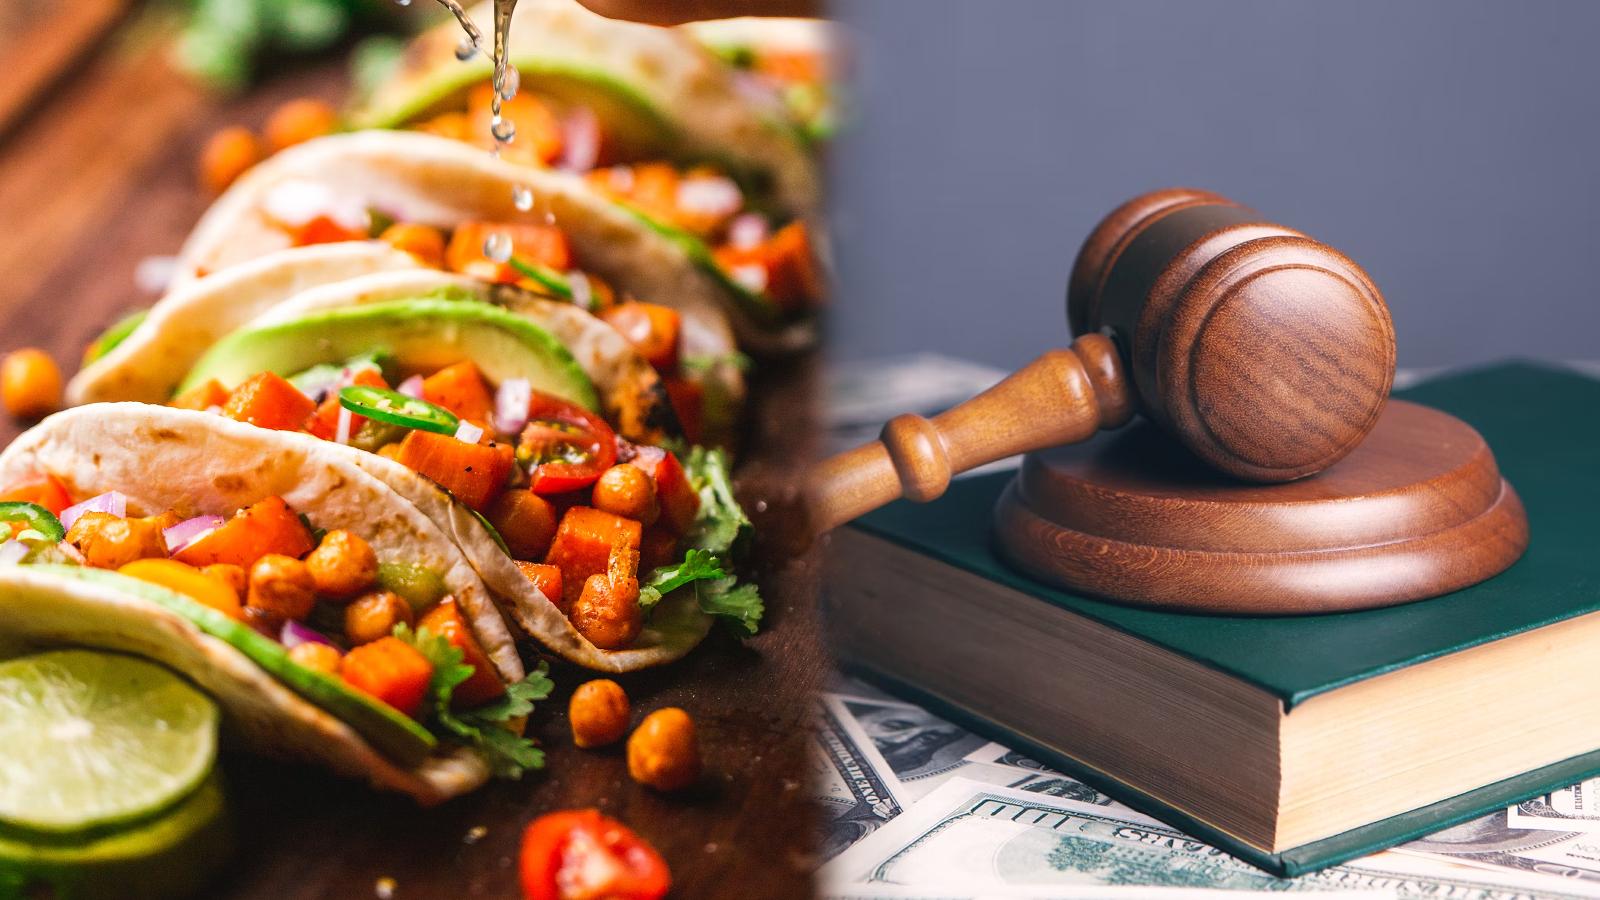 Tacos on the left and a judge's gavel to the right